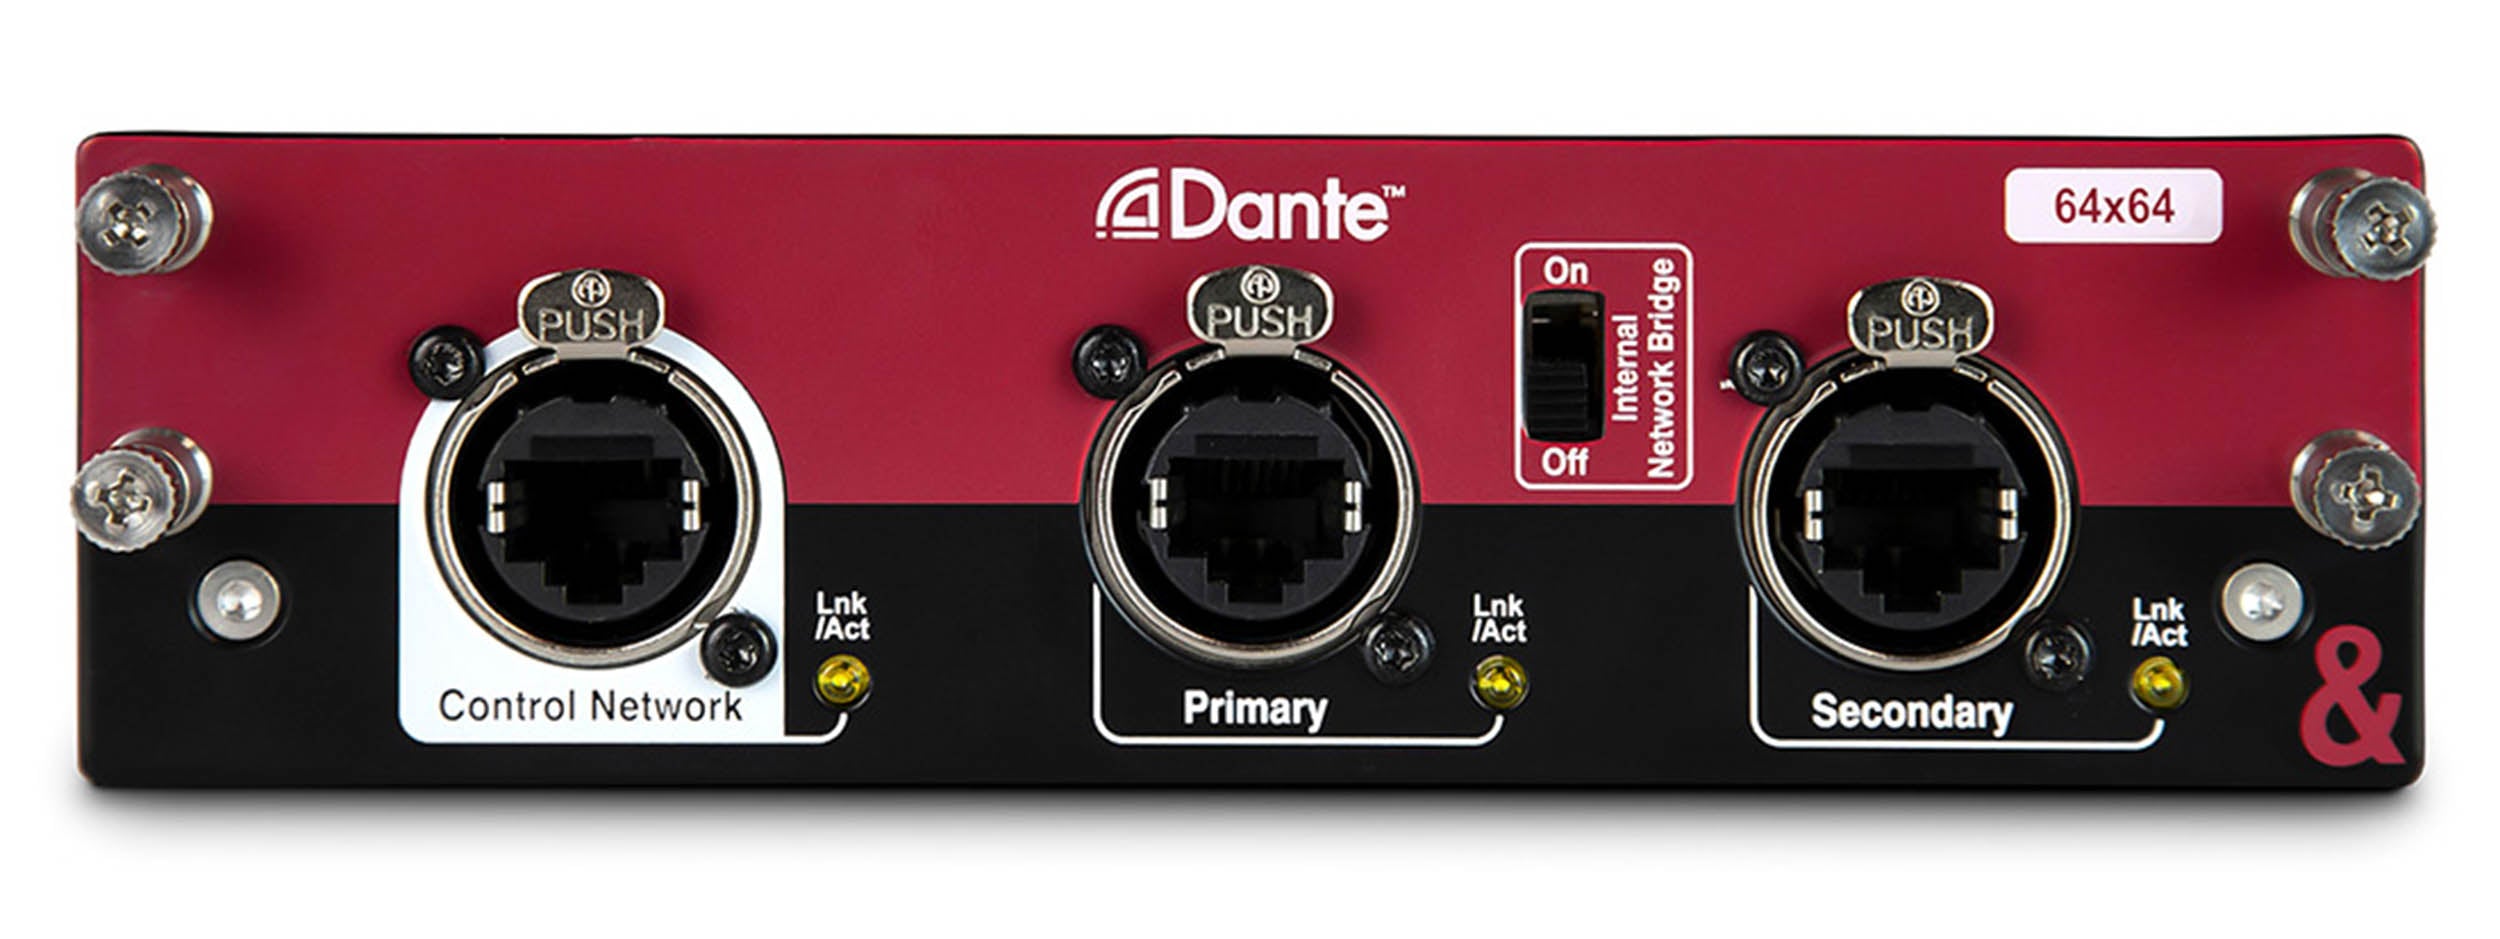 Allen & Heath M-DL-DANTE64-A, Audio Networking Card for dLive and Avantis Mixers - Hollywood DJ